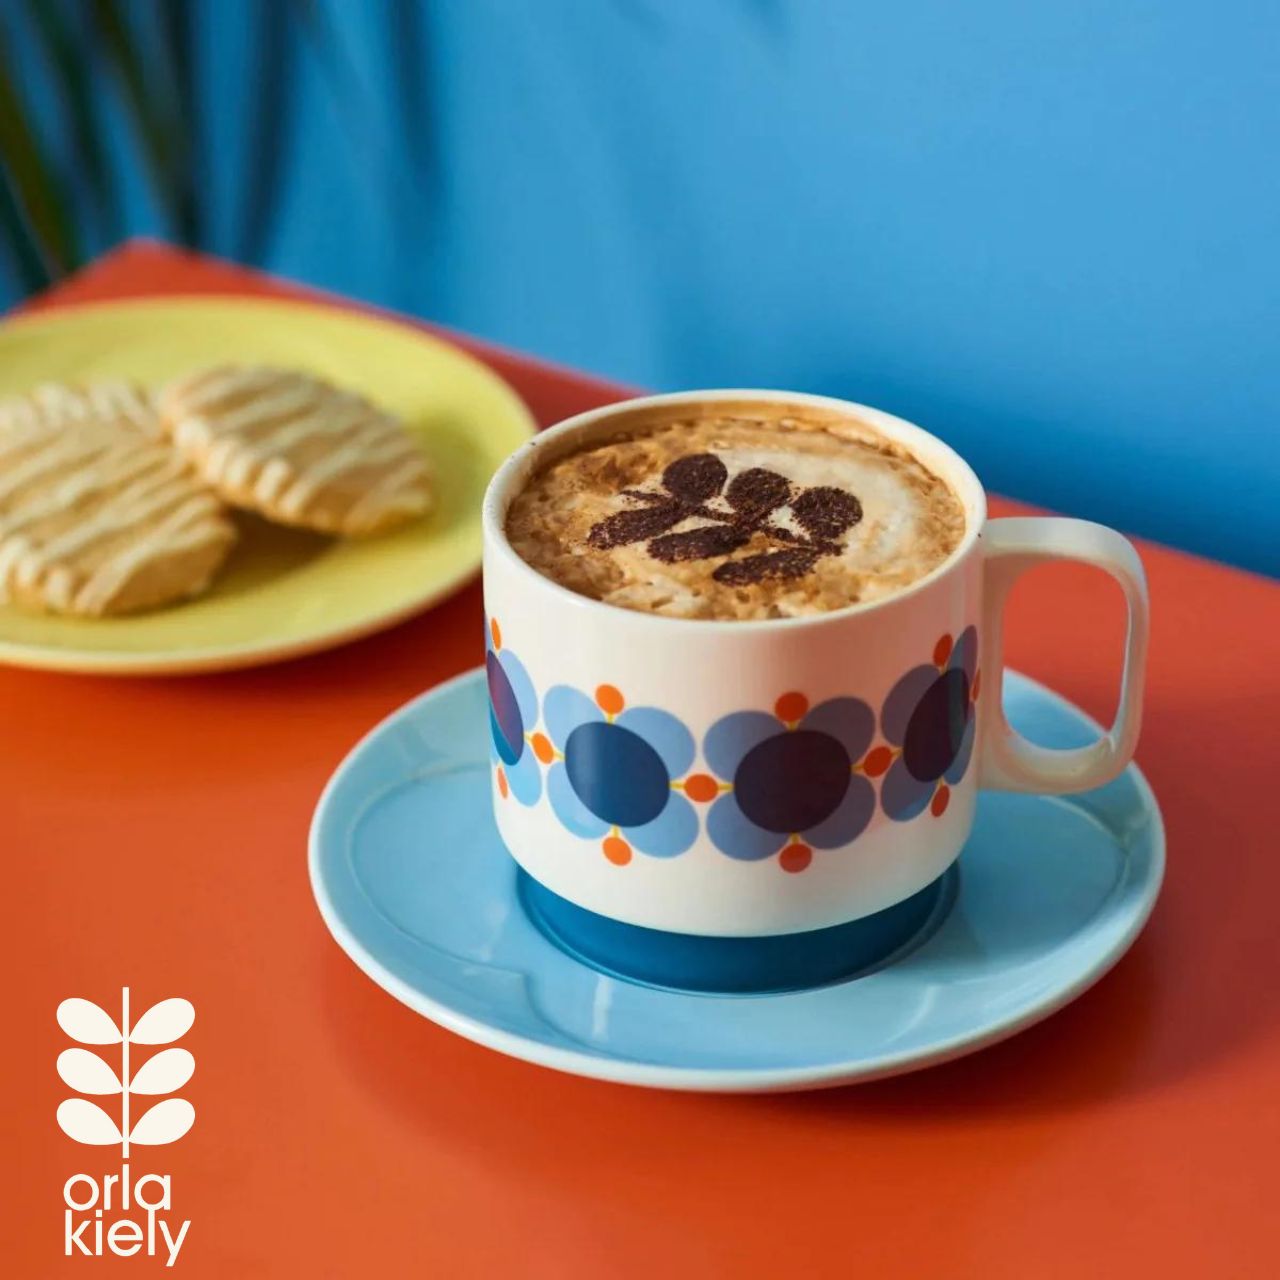 DESIGNED IN THE UK BY ORLA KIELY: This set of two tea cup and saucer has a unique 'Atomic Flower' print.